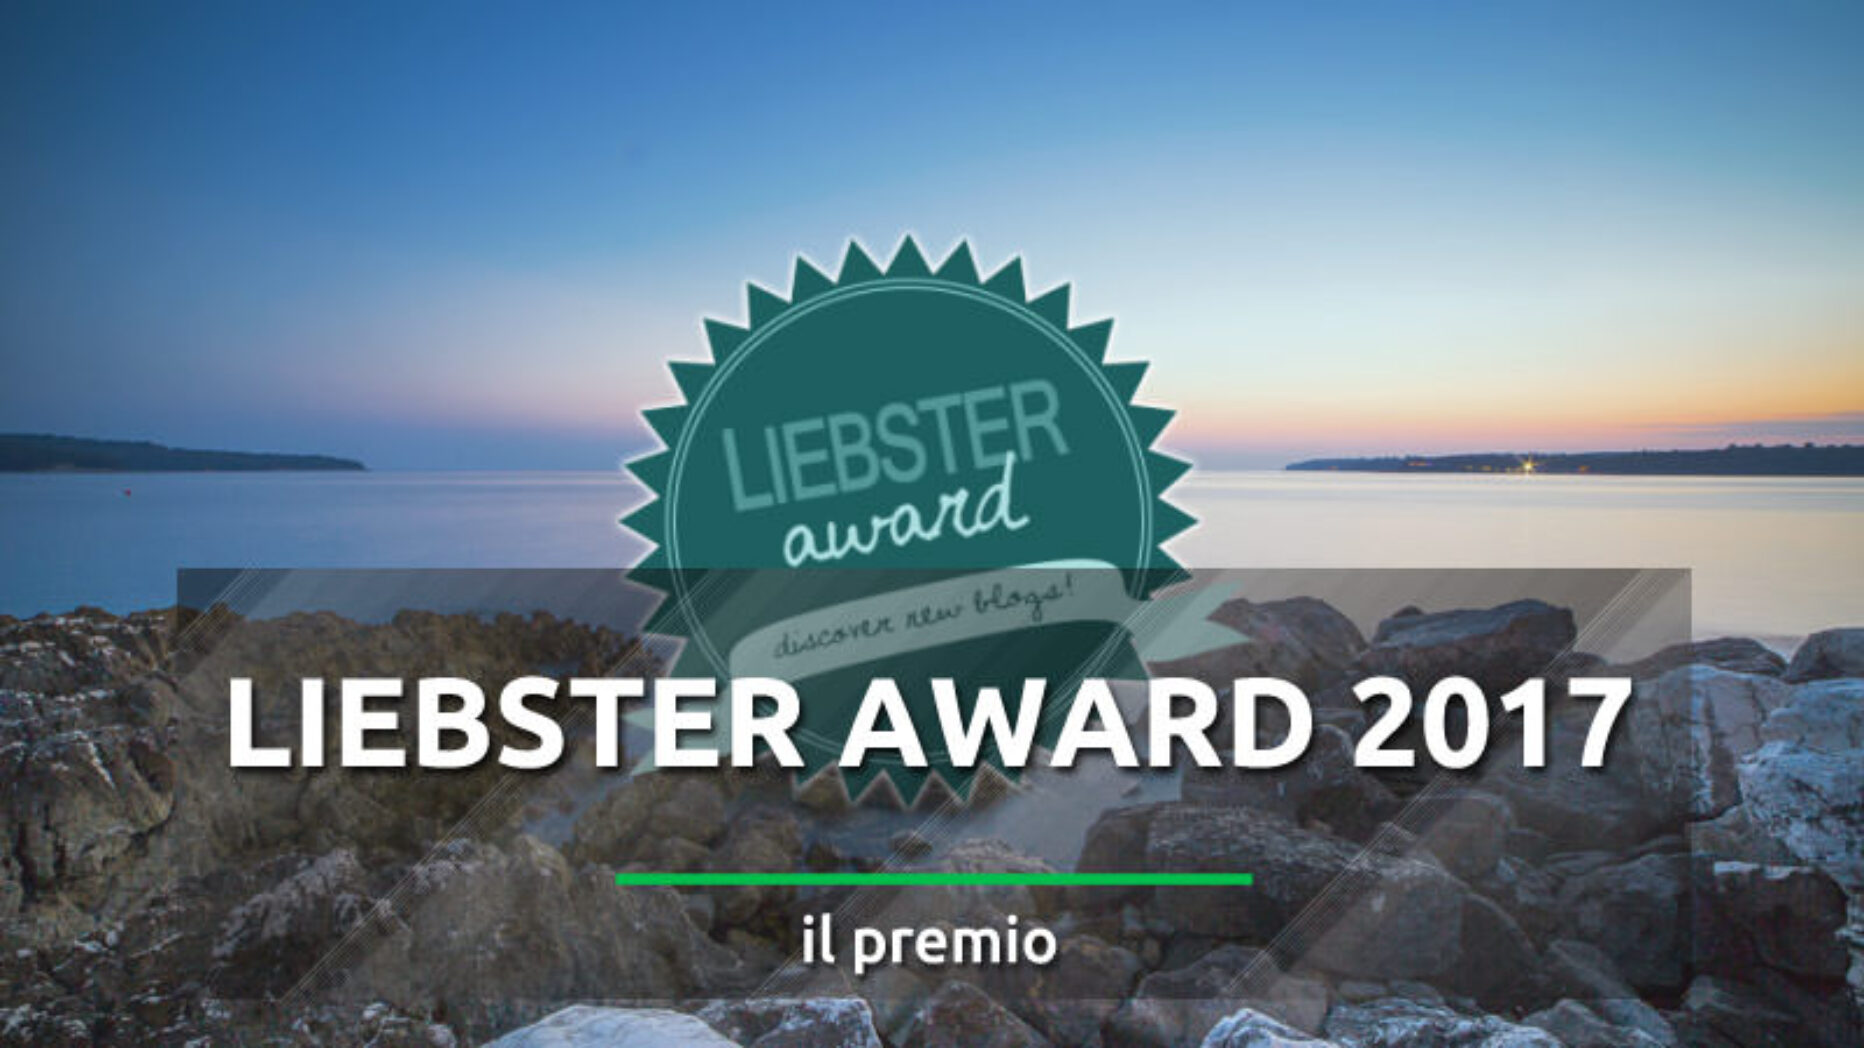 Liebster Award 2017 – and the winner is…